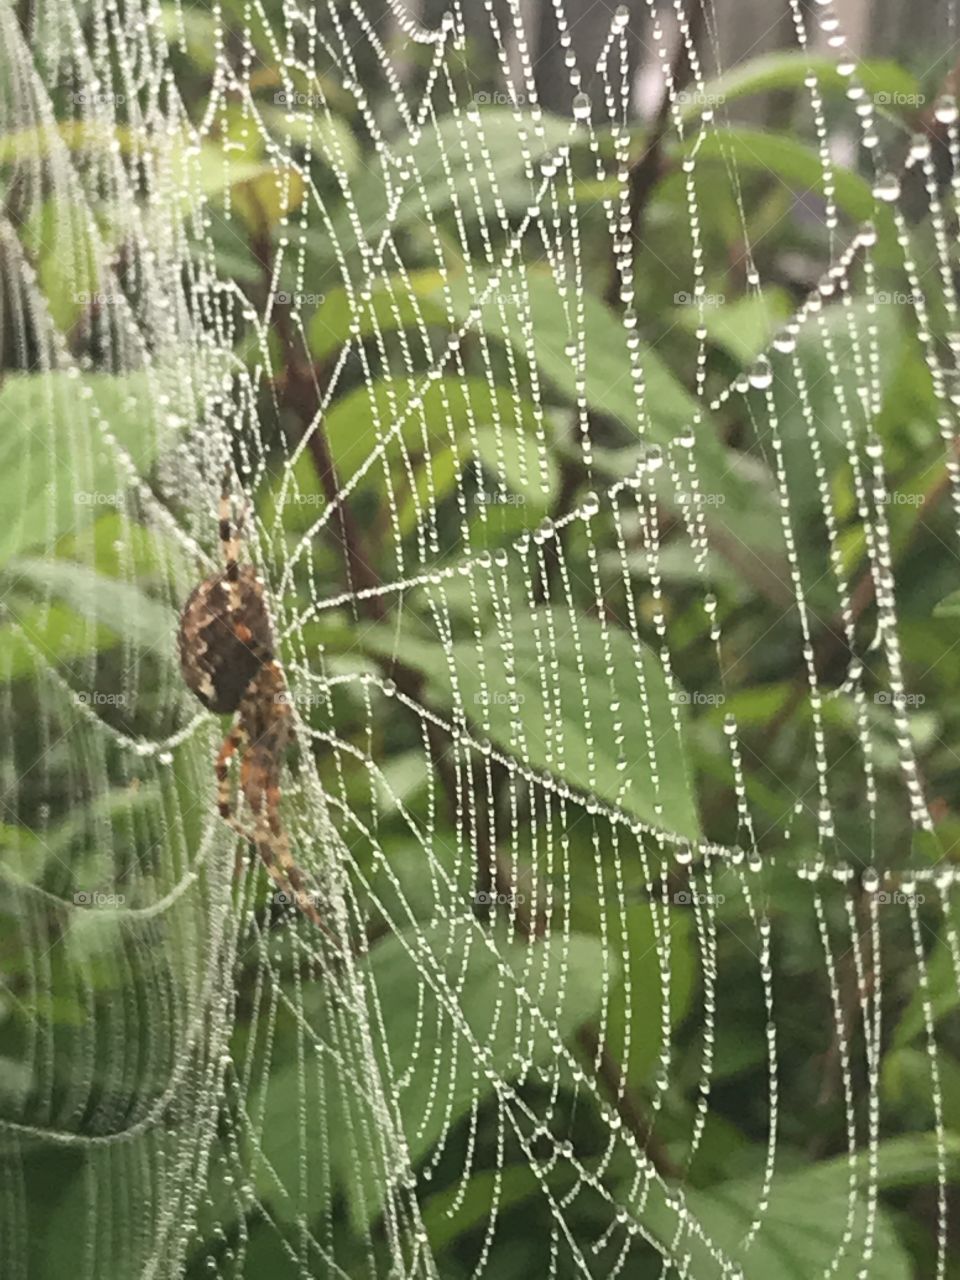 A spider taking care of his web in the pouring rain